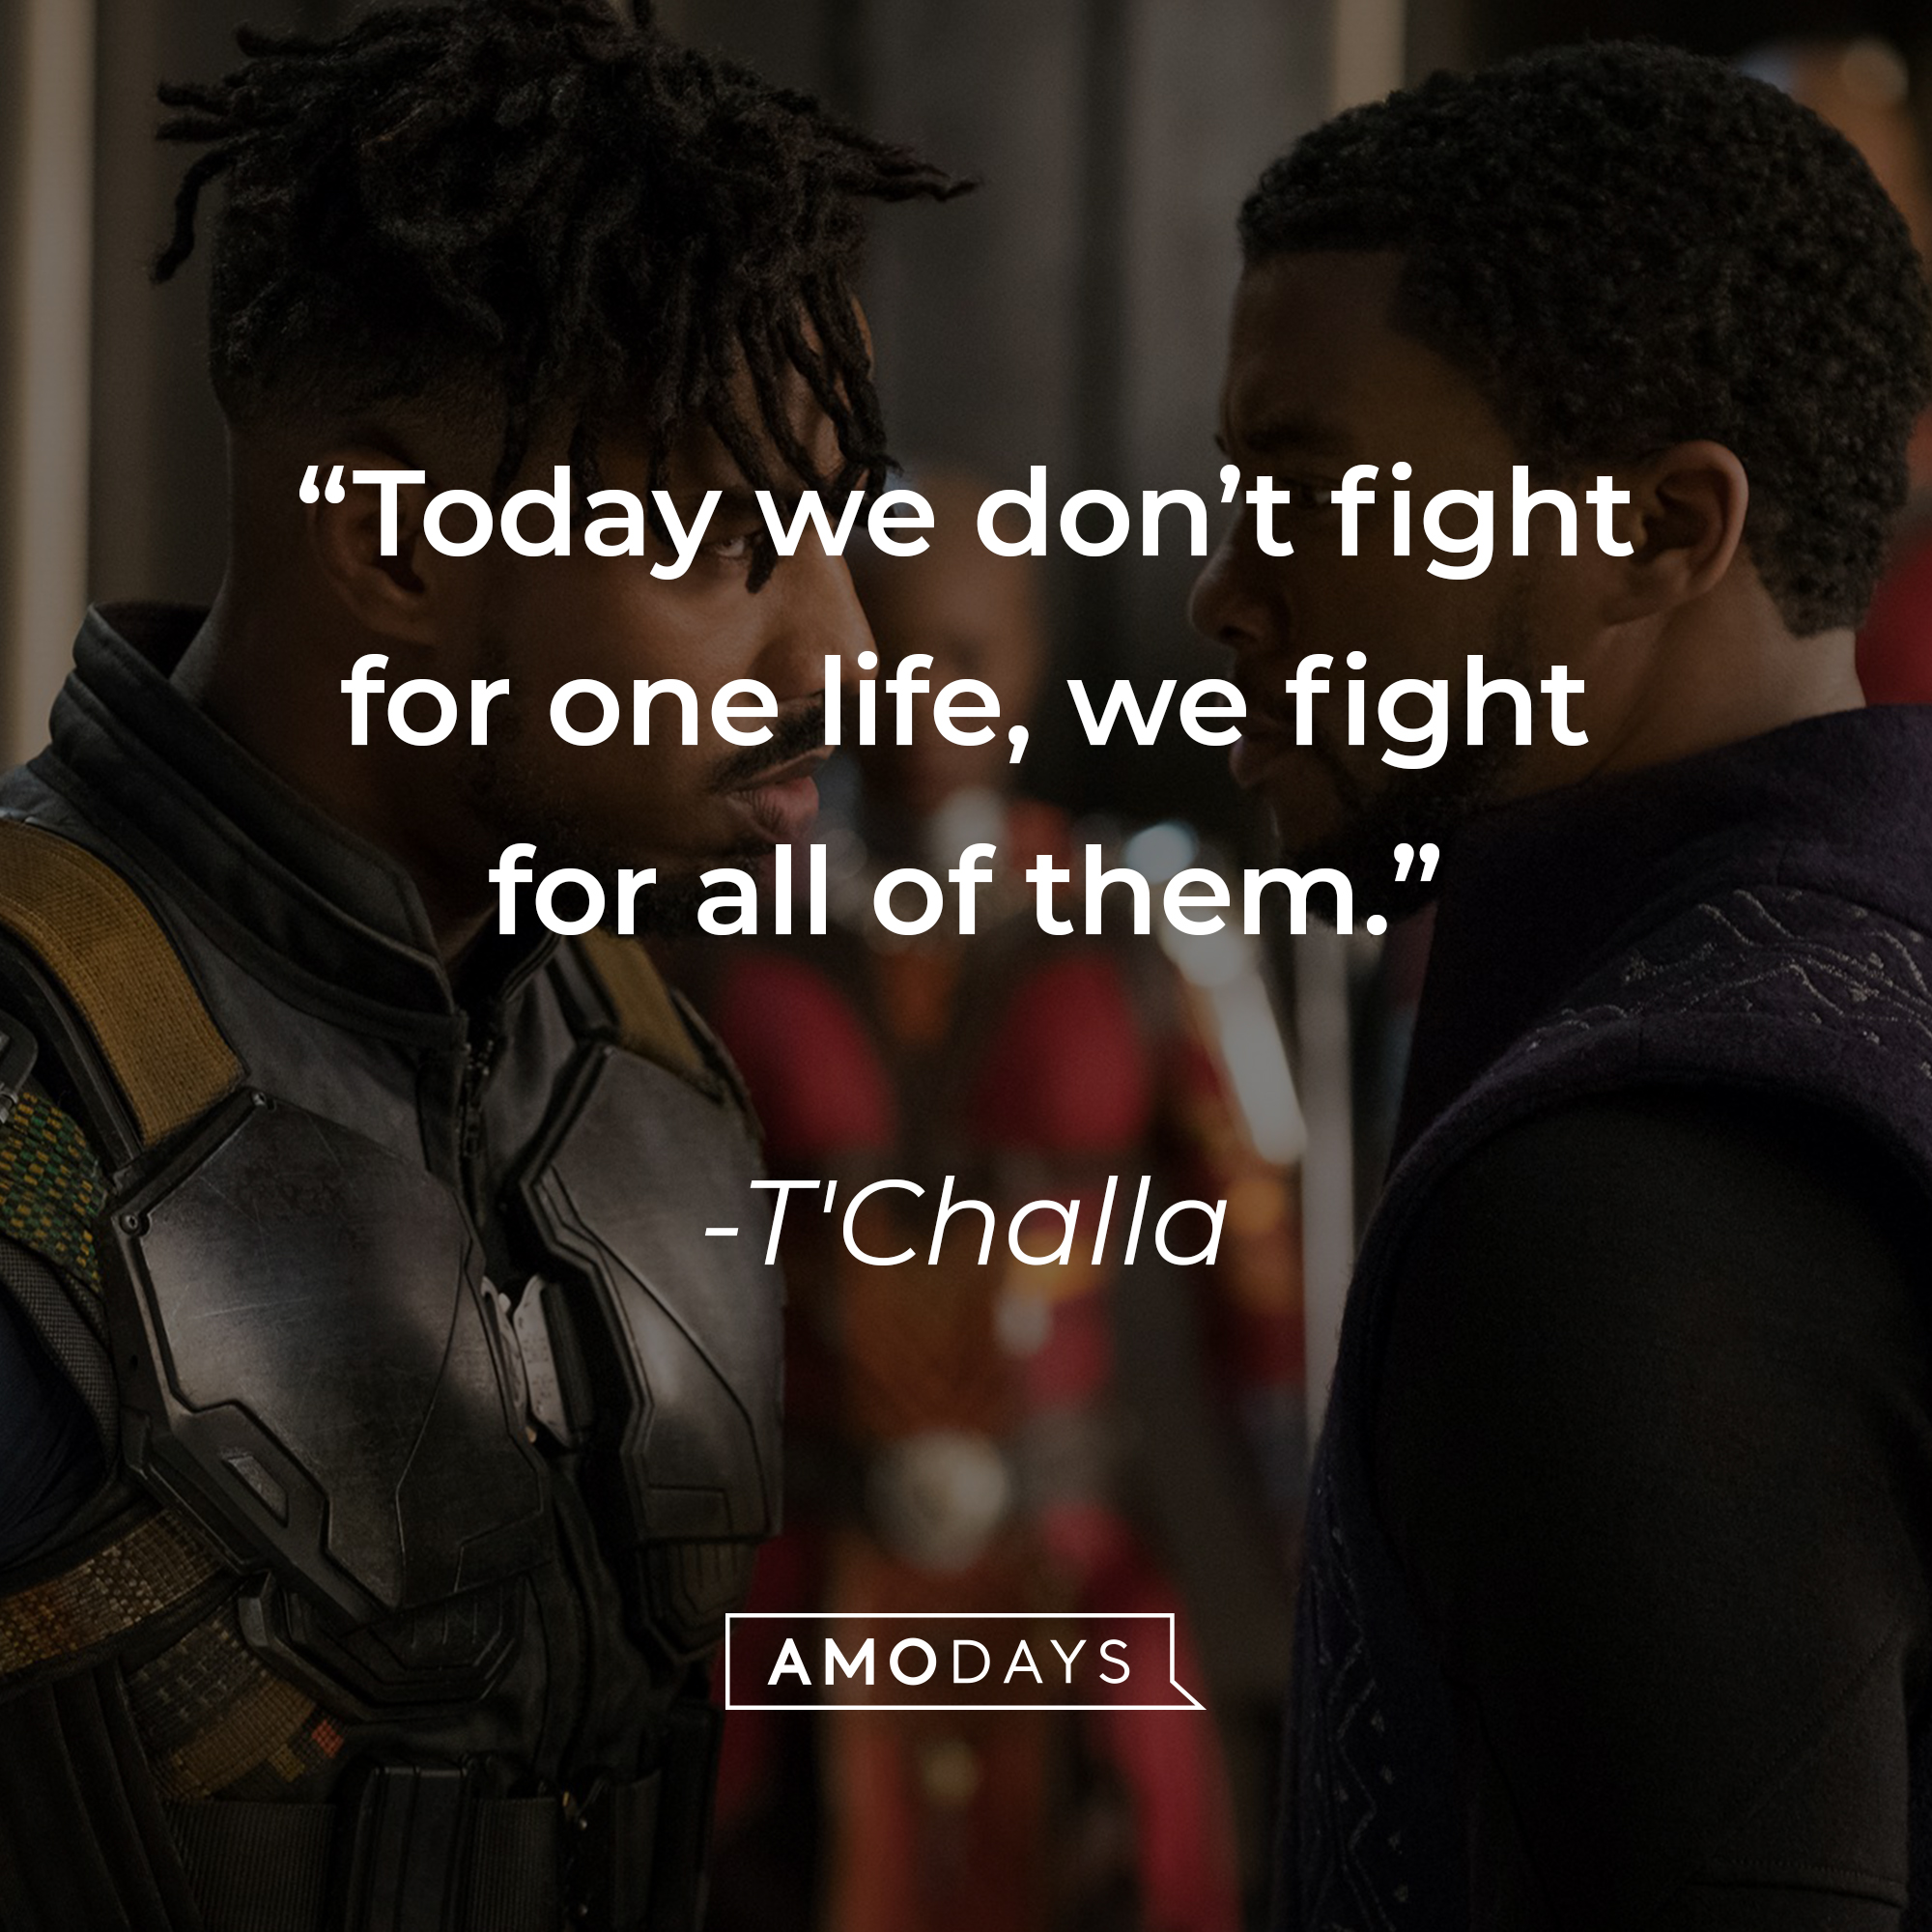 T'Challa's quote: “Today we don’t fight for one life, we fight for all of them.” | Source: facebook.com/BlackPantherMovie